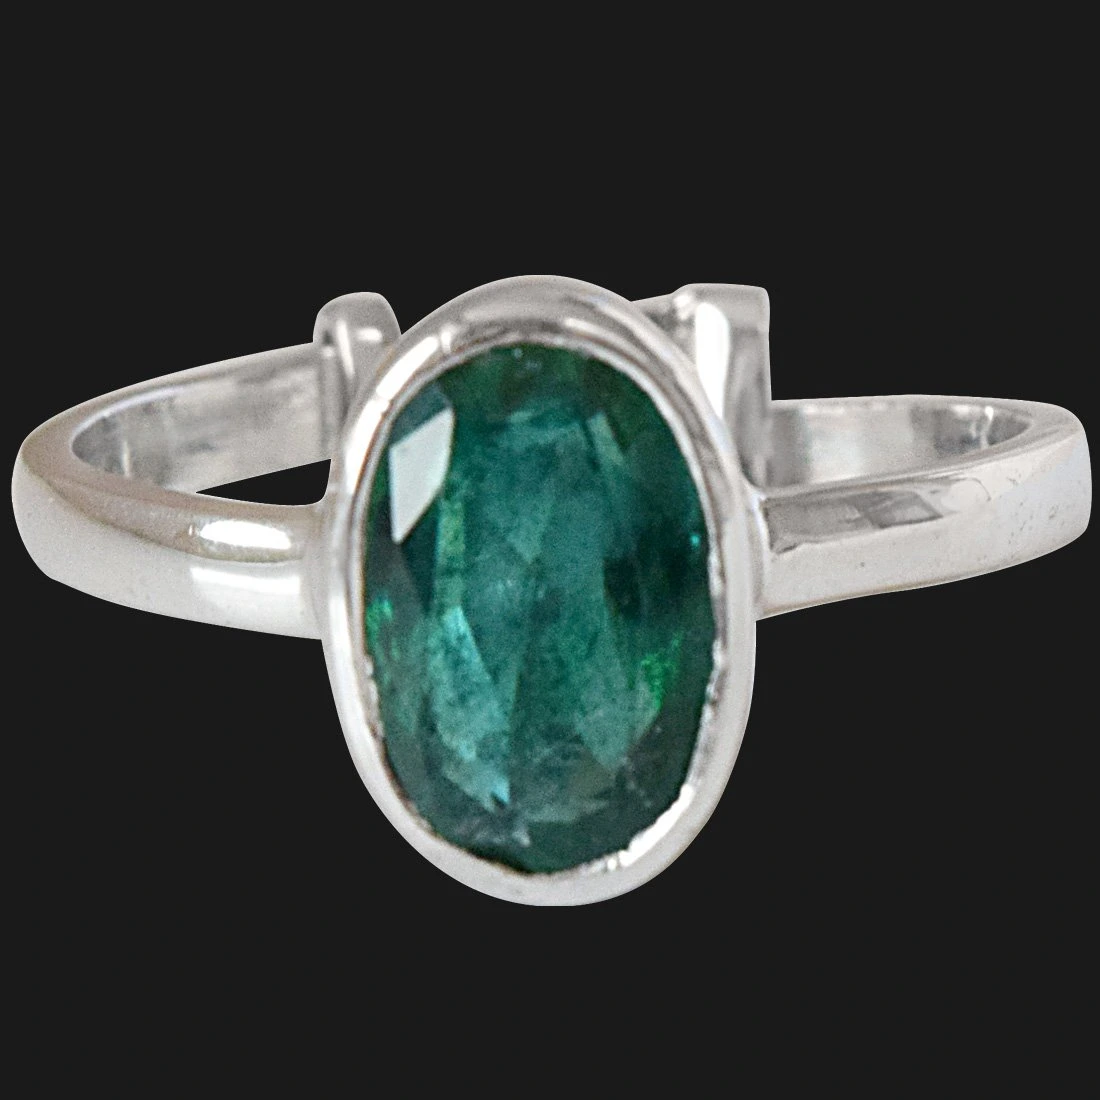 2.14cts AA Grade Green Oval Emerald and 925 Silver Adjustable Ring (GSR68)